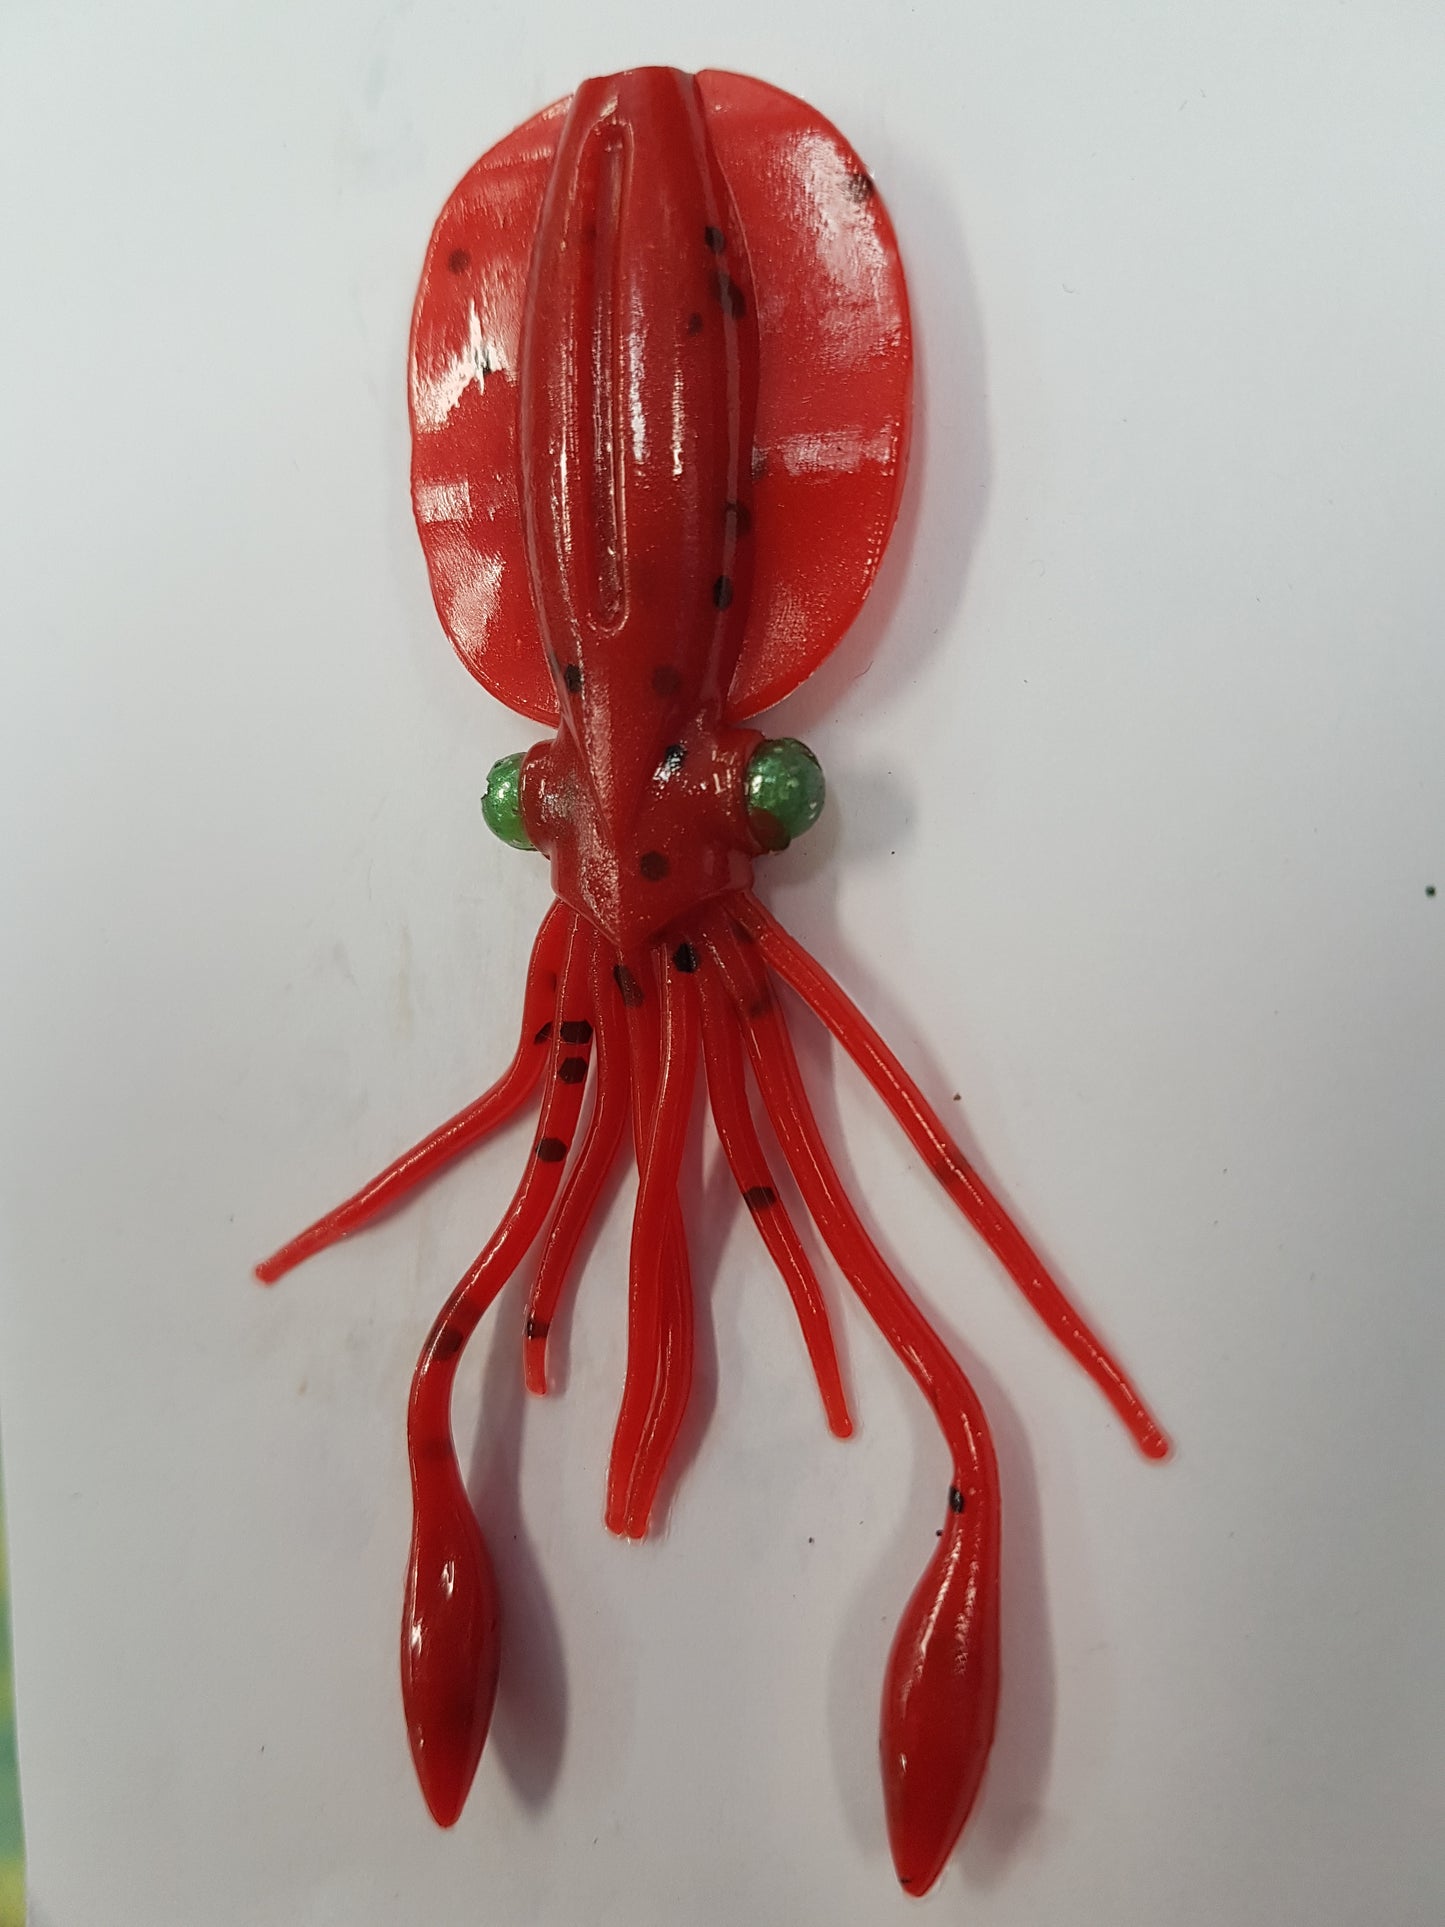 Trickys Lures - Squidly Squid shaped soft plastic